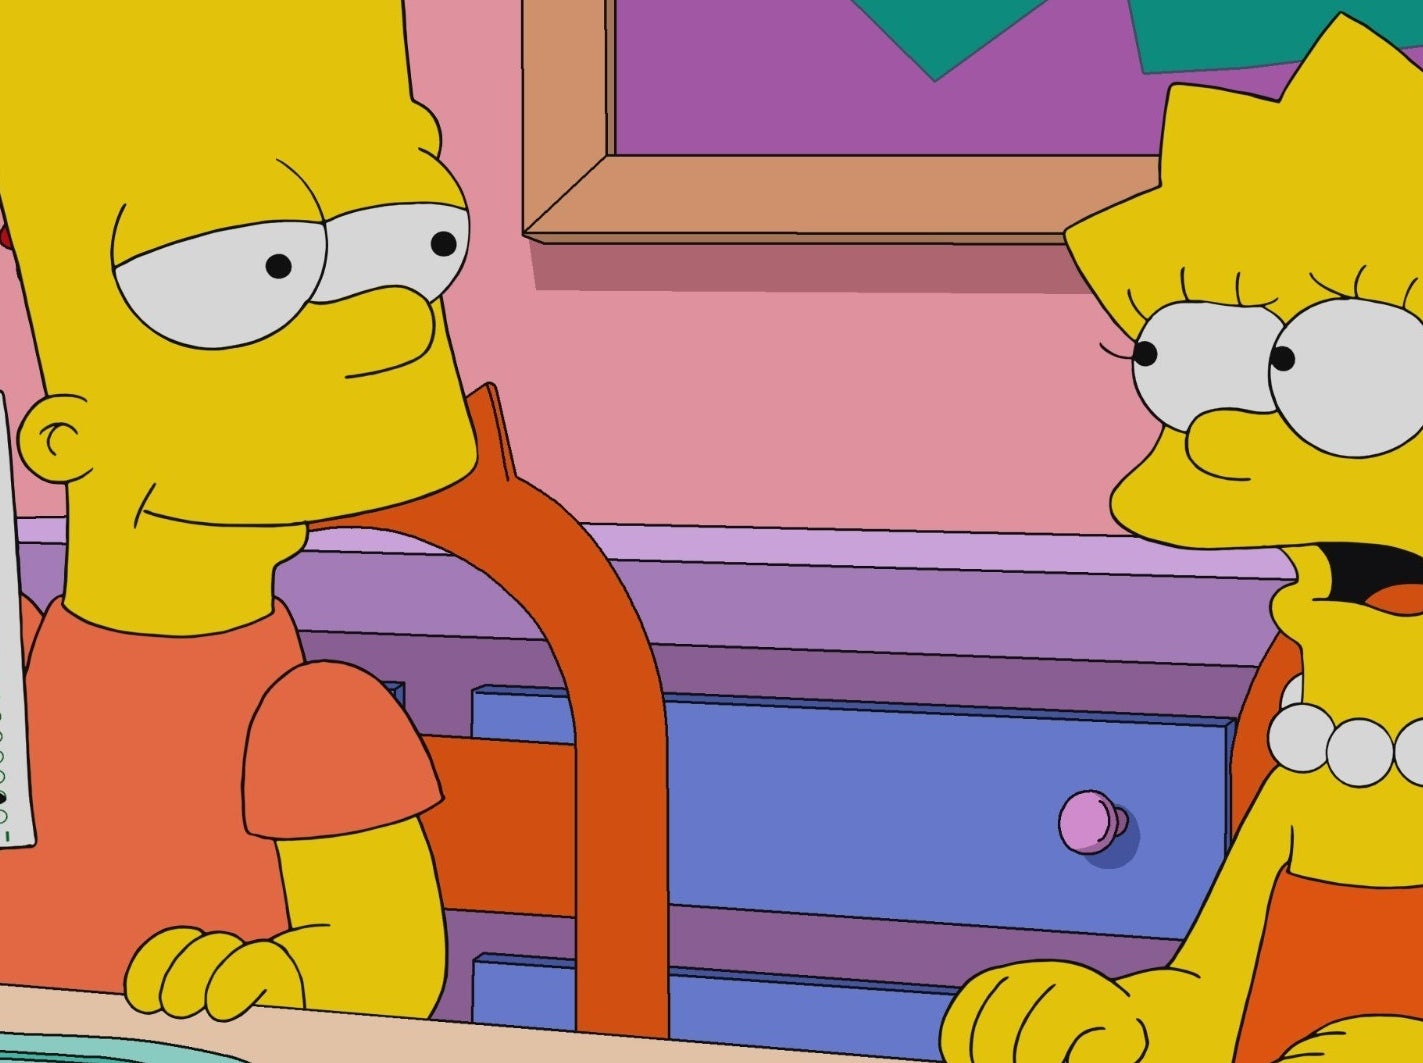 Bart Simpson in The Simpsons